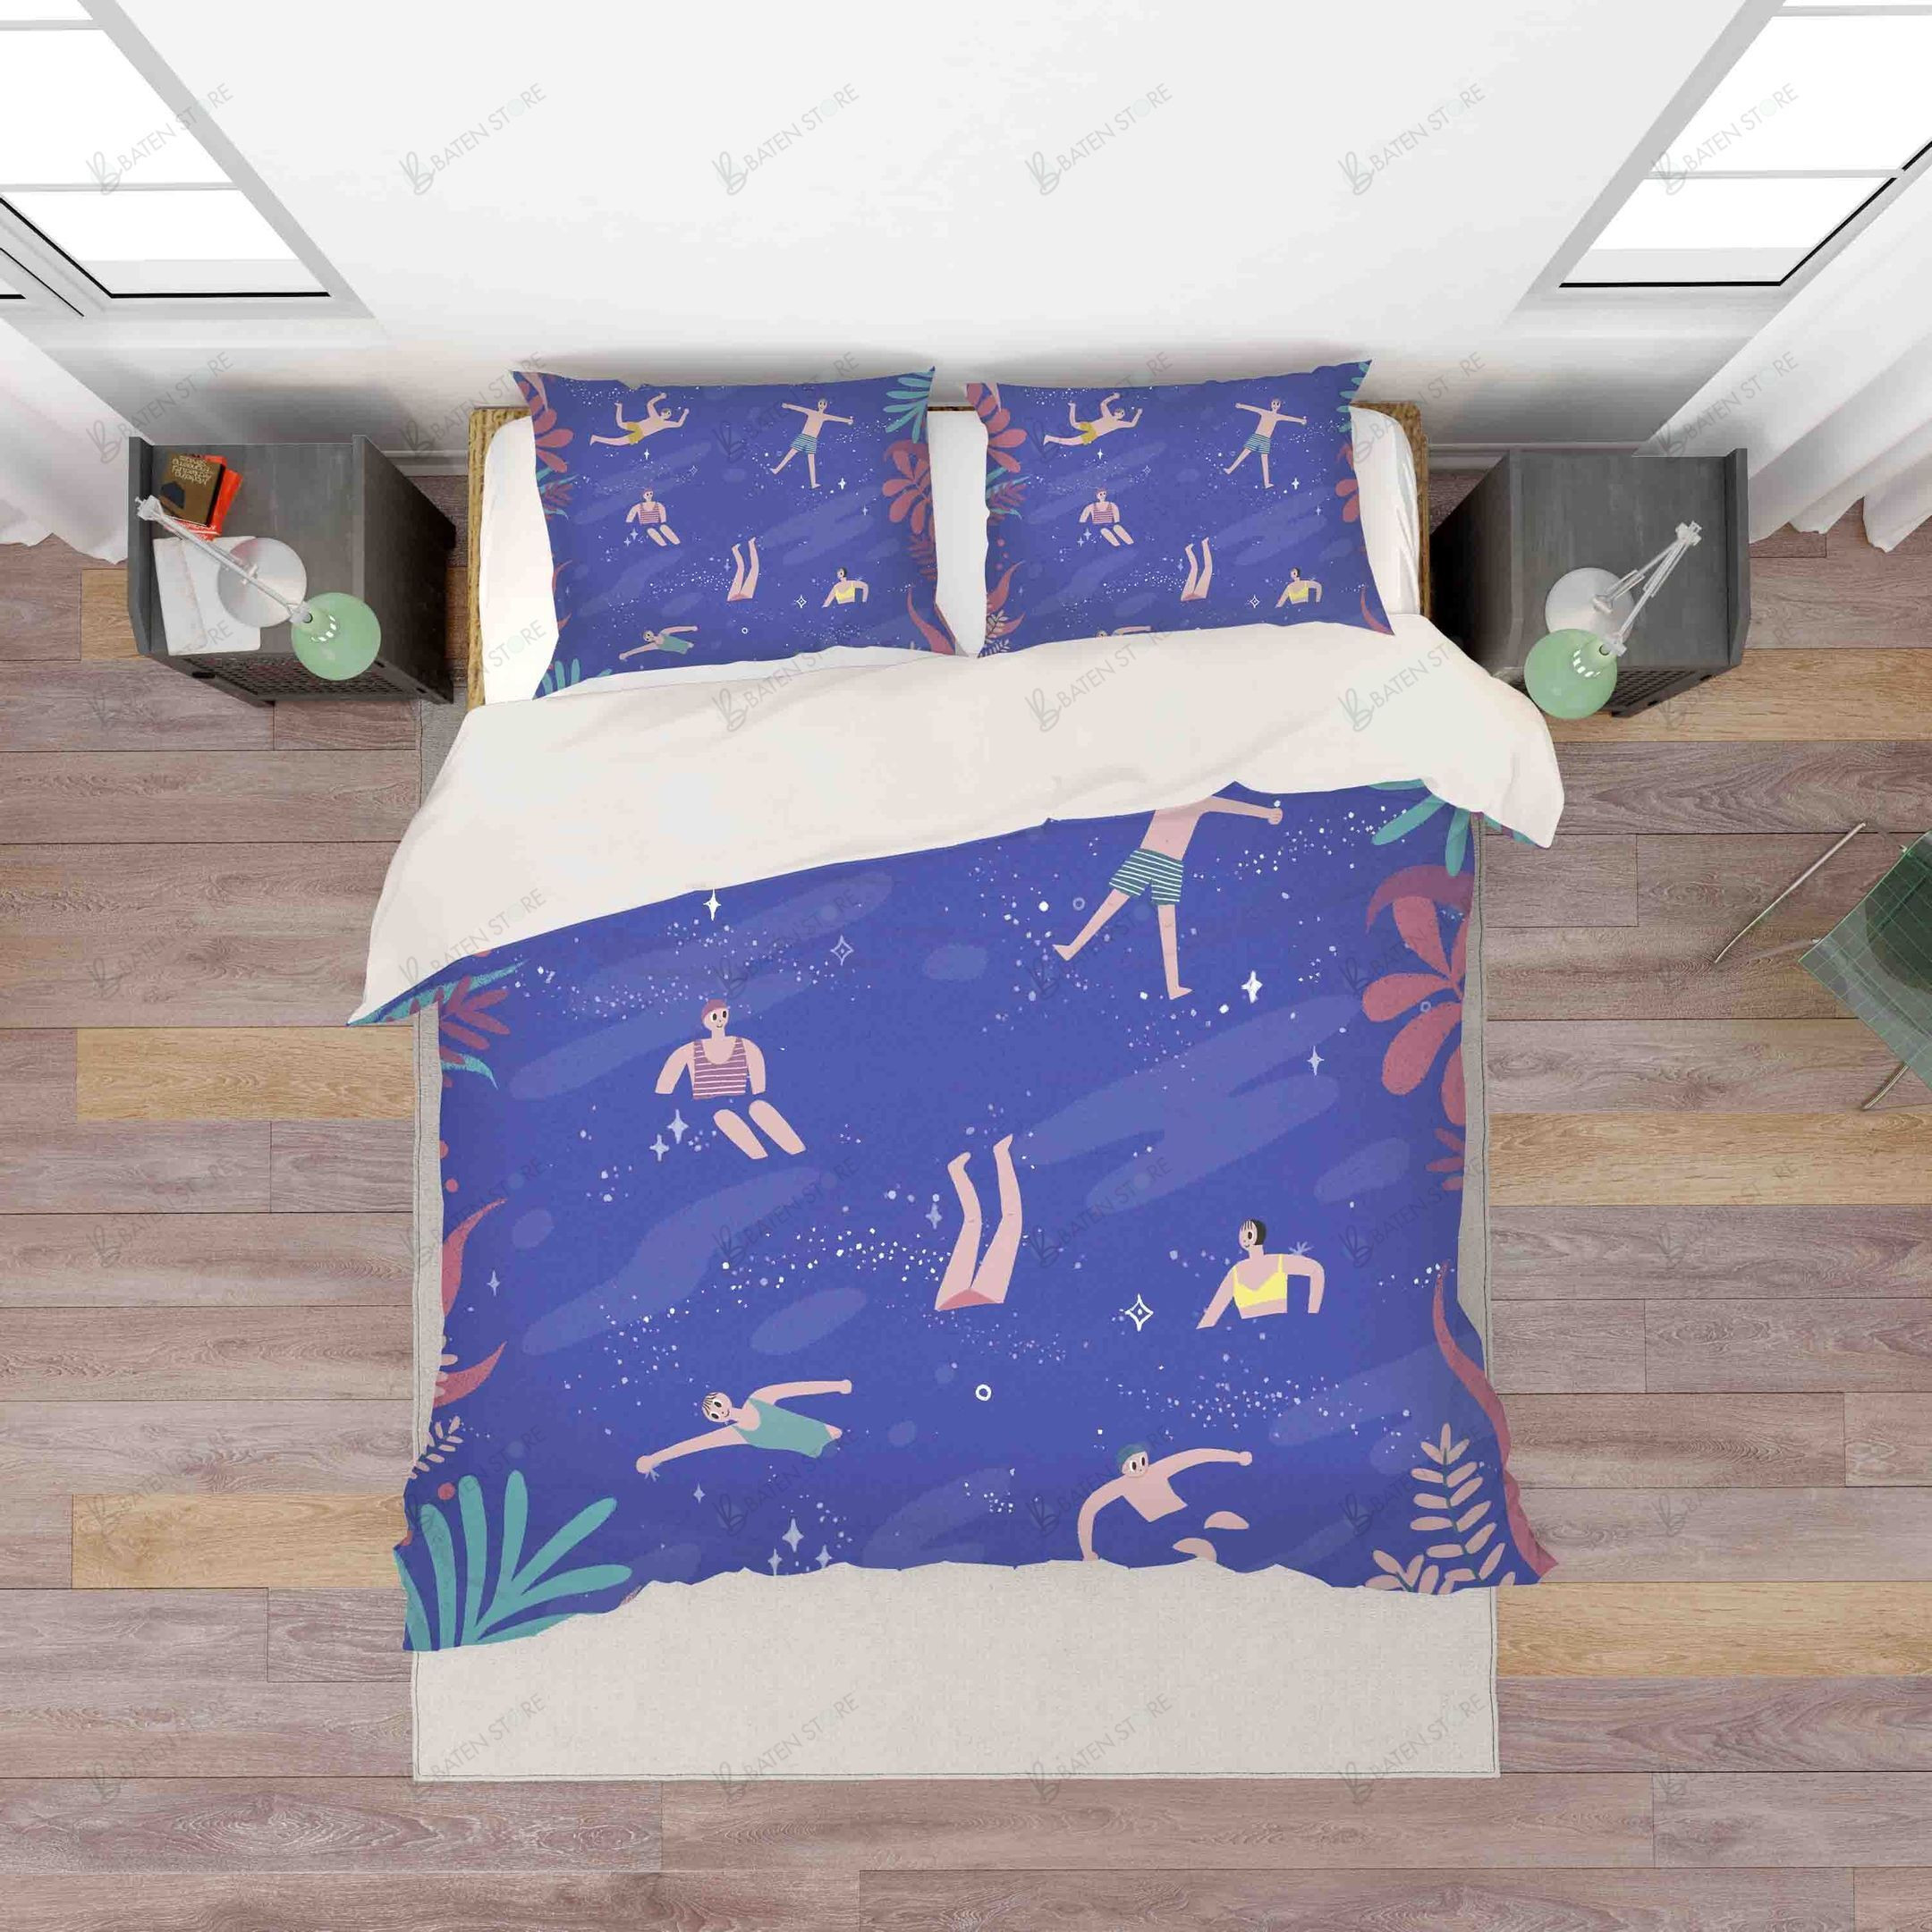 3d blue crab bed sheets duvet cover bedding set perfect for birthday christmas thanksgiving presents 8q4wk